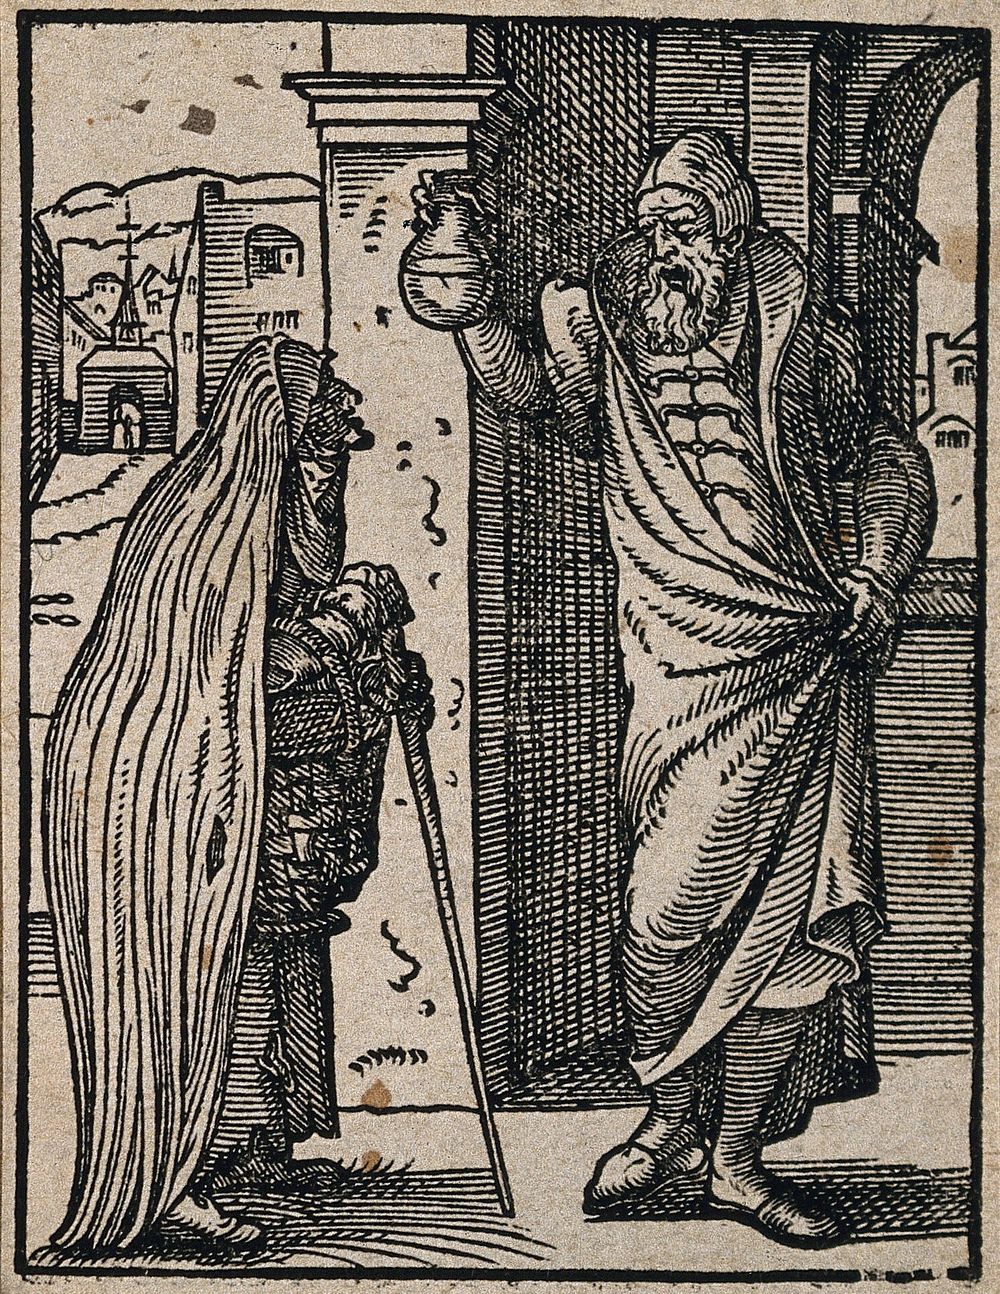 A physician examining a urine specimen, brought to him by an elderly woman. Woodcut by J. Amman, 1568.